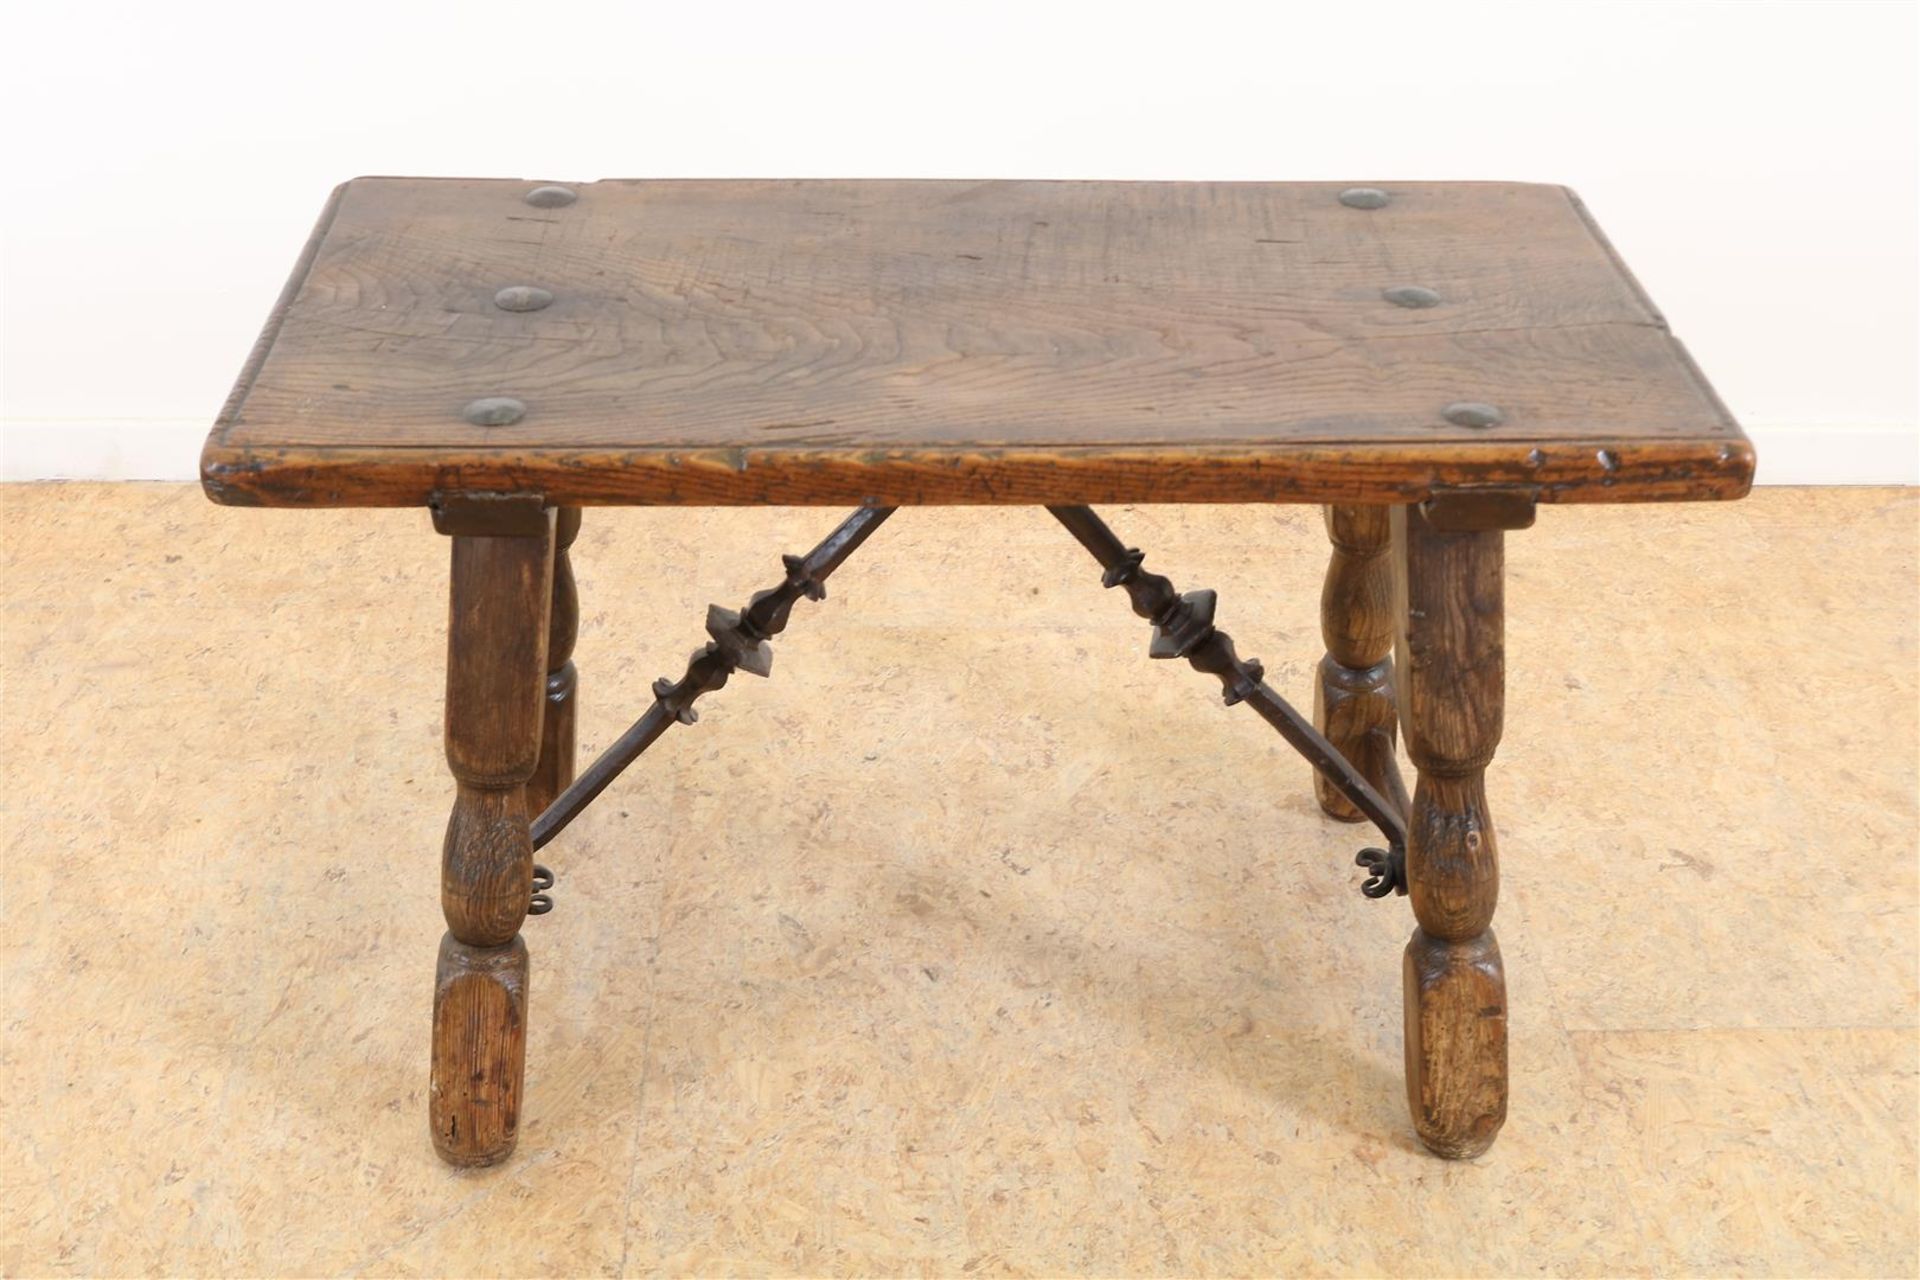 Chestnut wood table with wrought iron connections, Spain late 17th century, h. 48, w. 80, d. 40